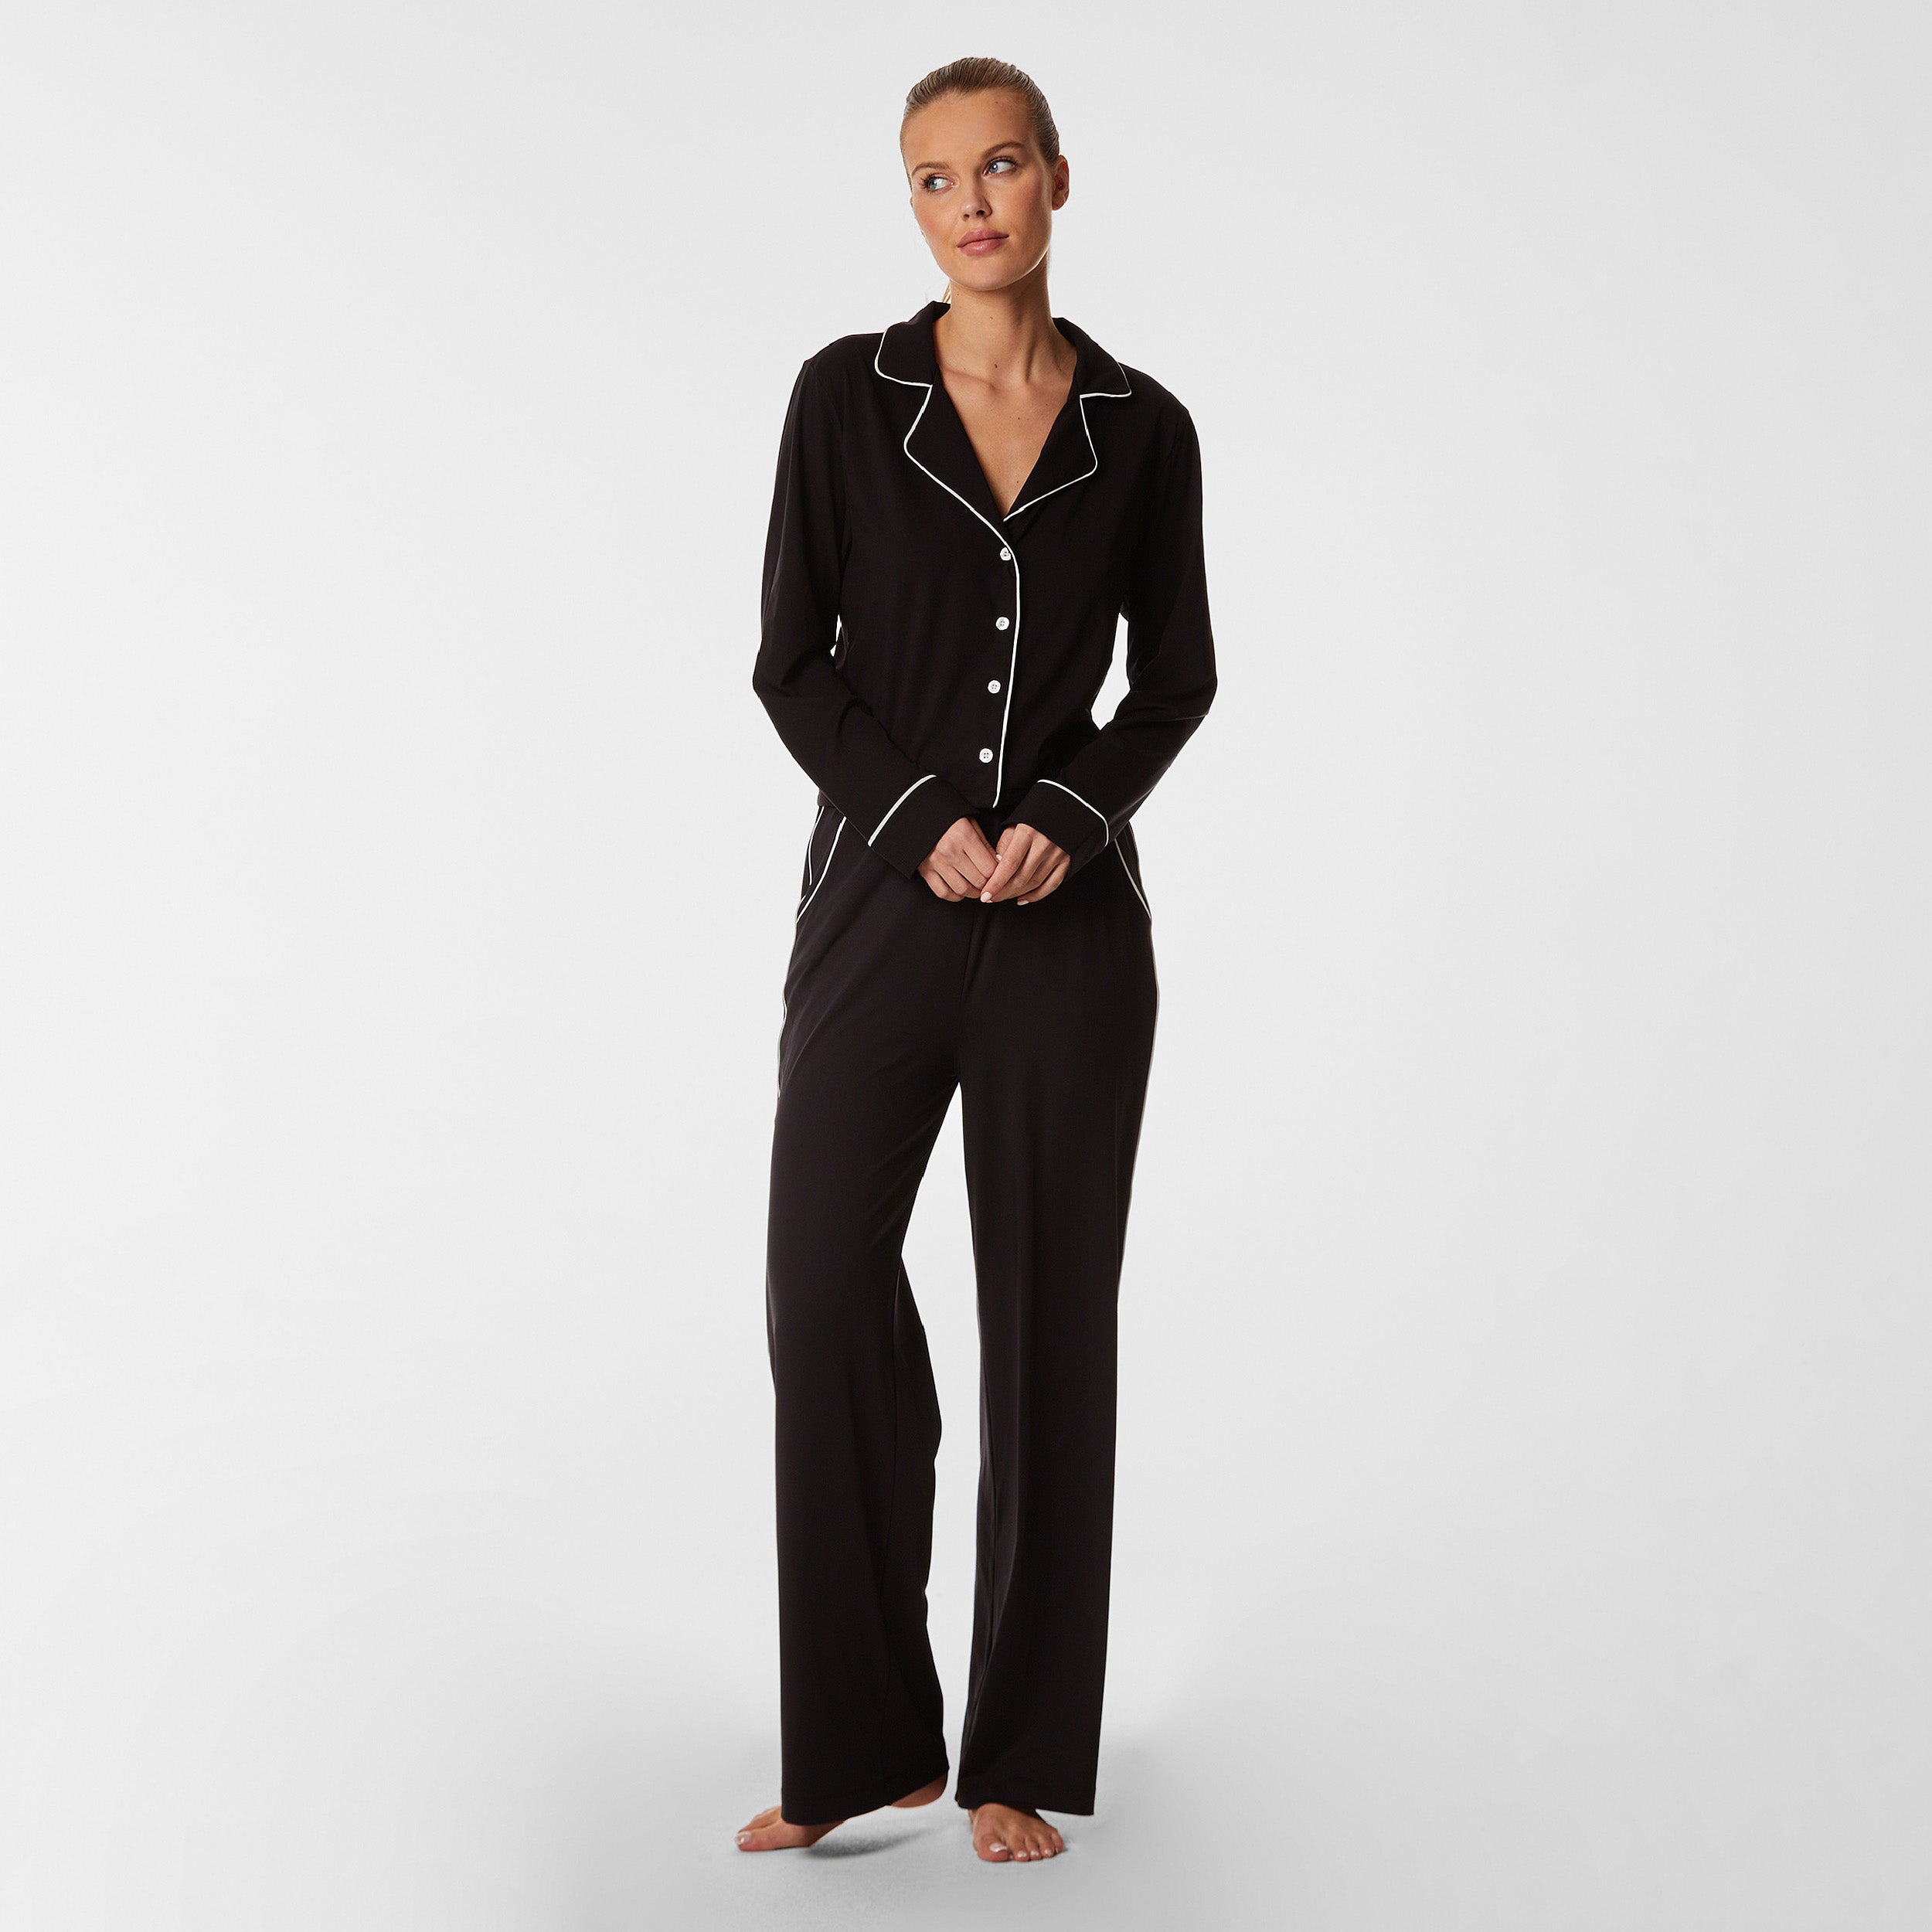 Full body front view of woman wearing soft Black Pajama set.